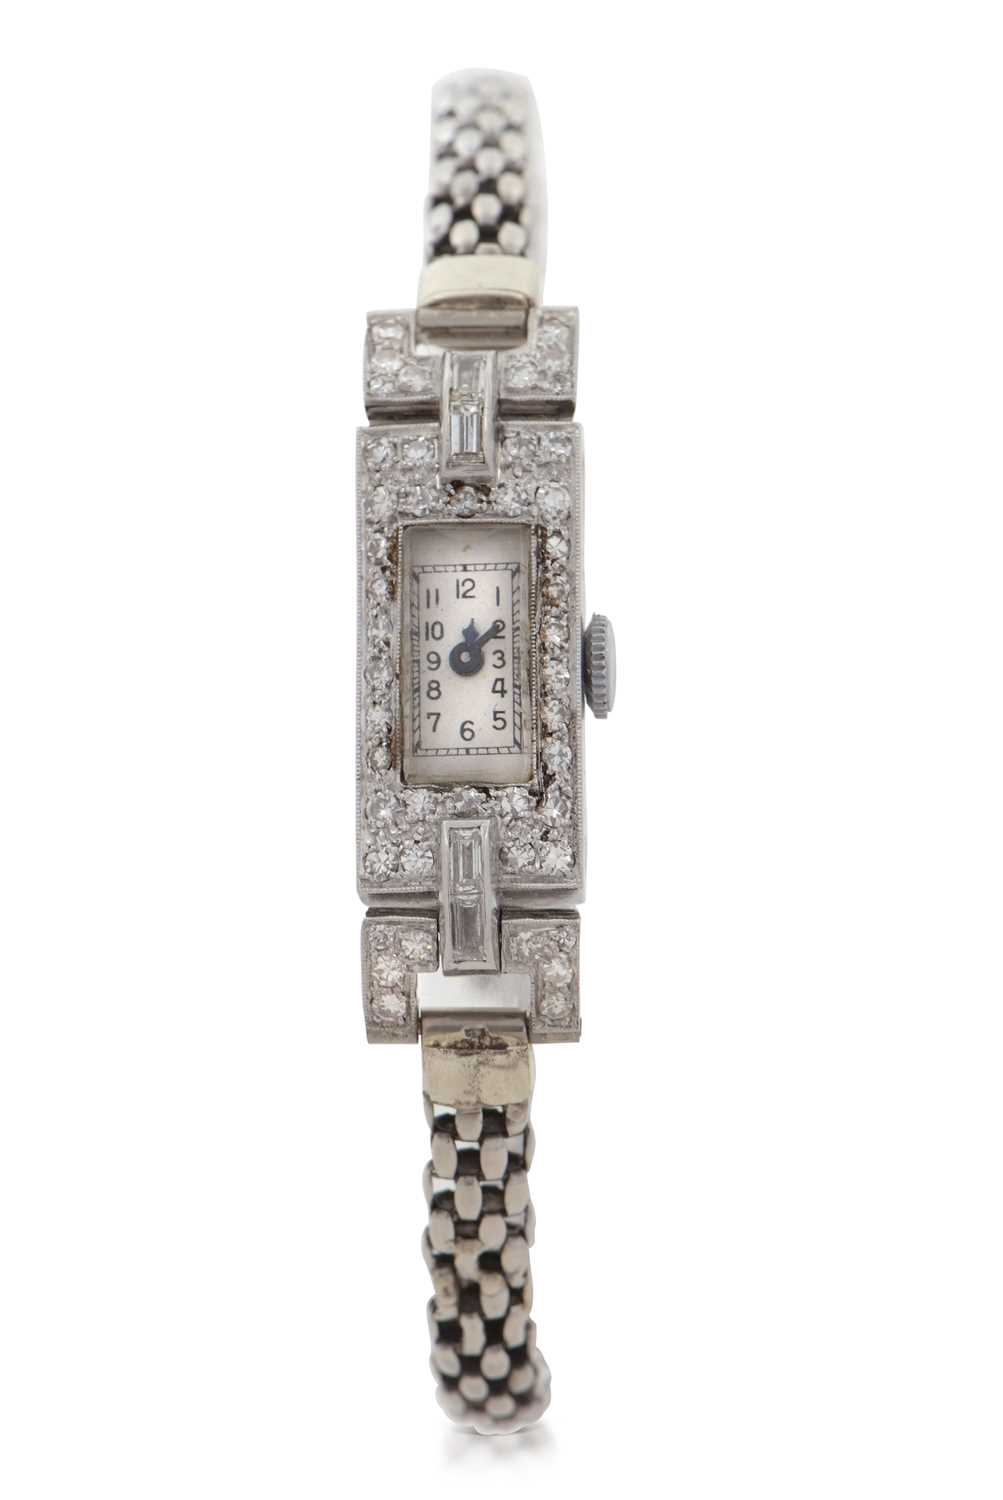 An Art Deco precious metal and diamond ladies wristwatch, the end link of the bracelet is stamped